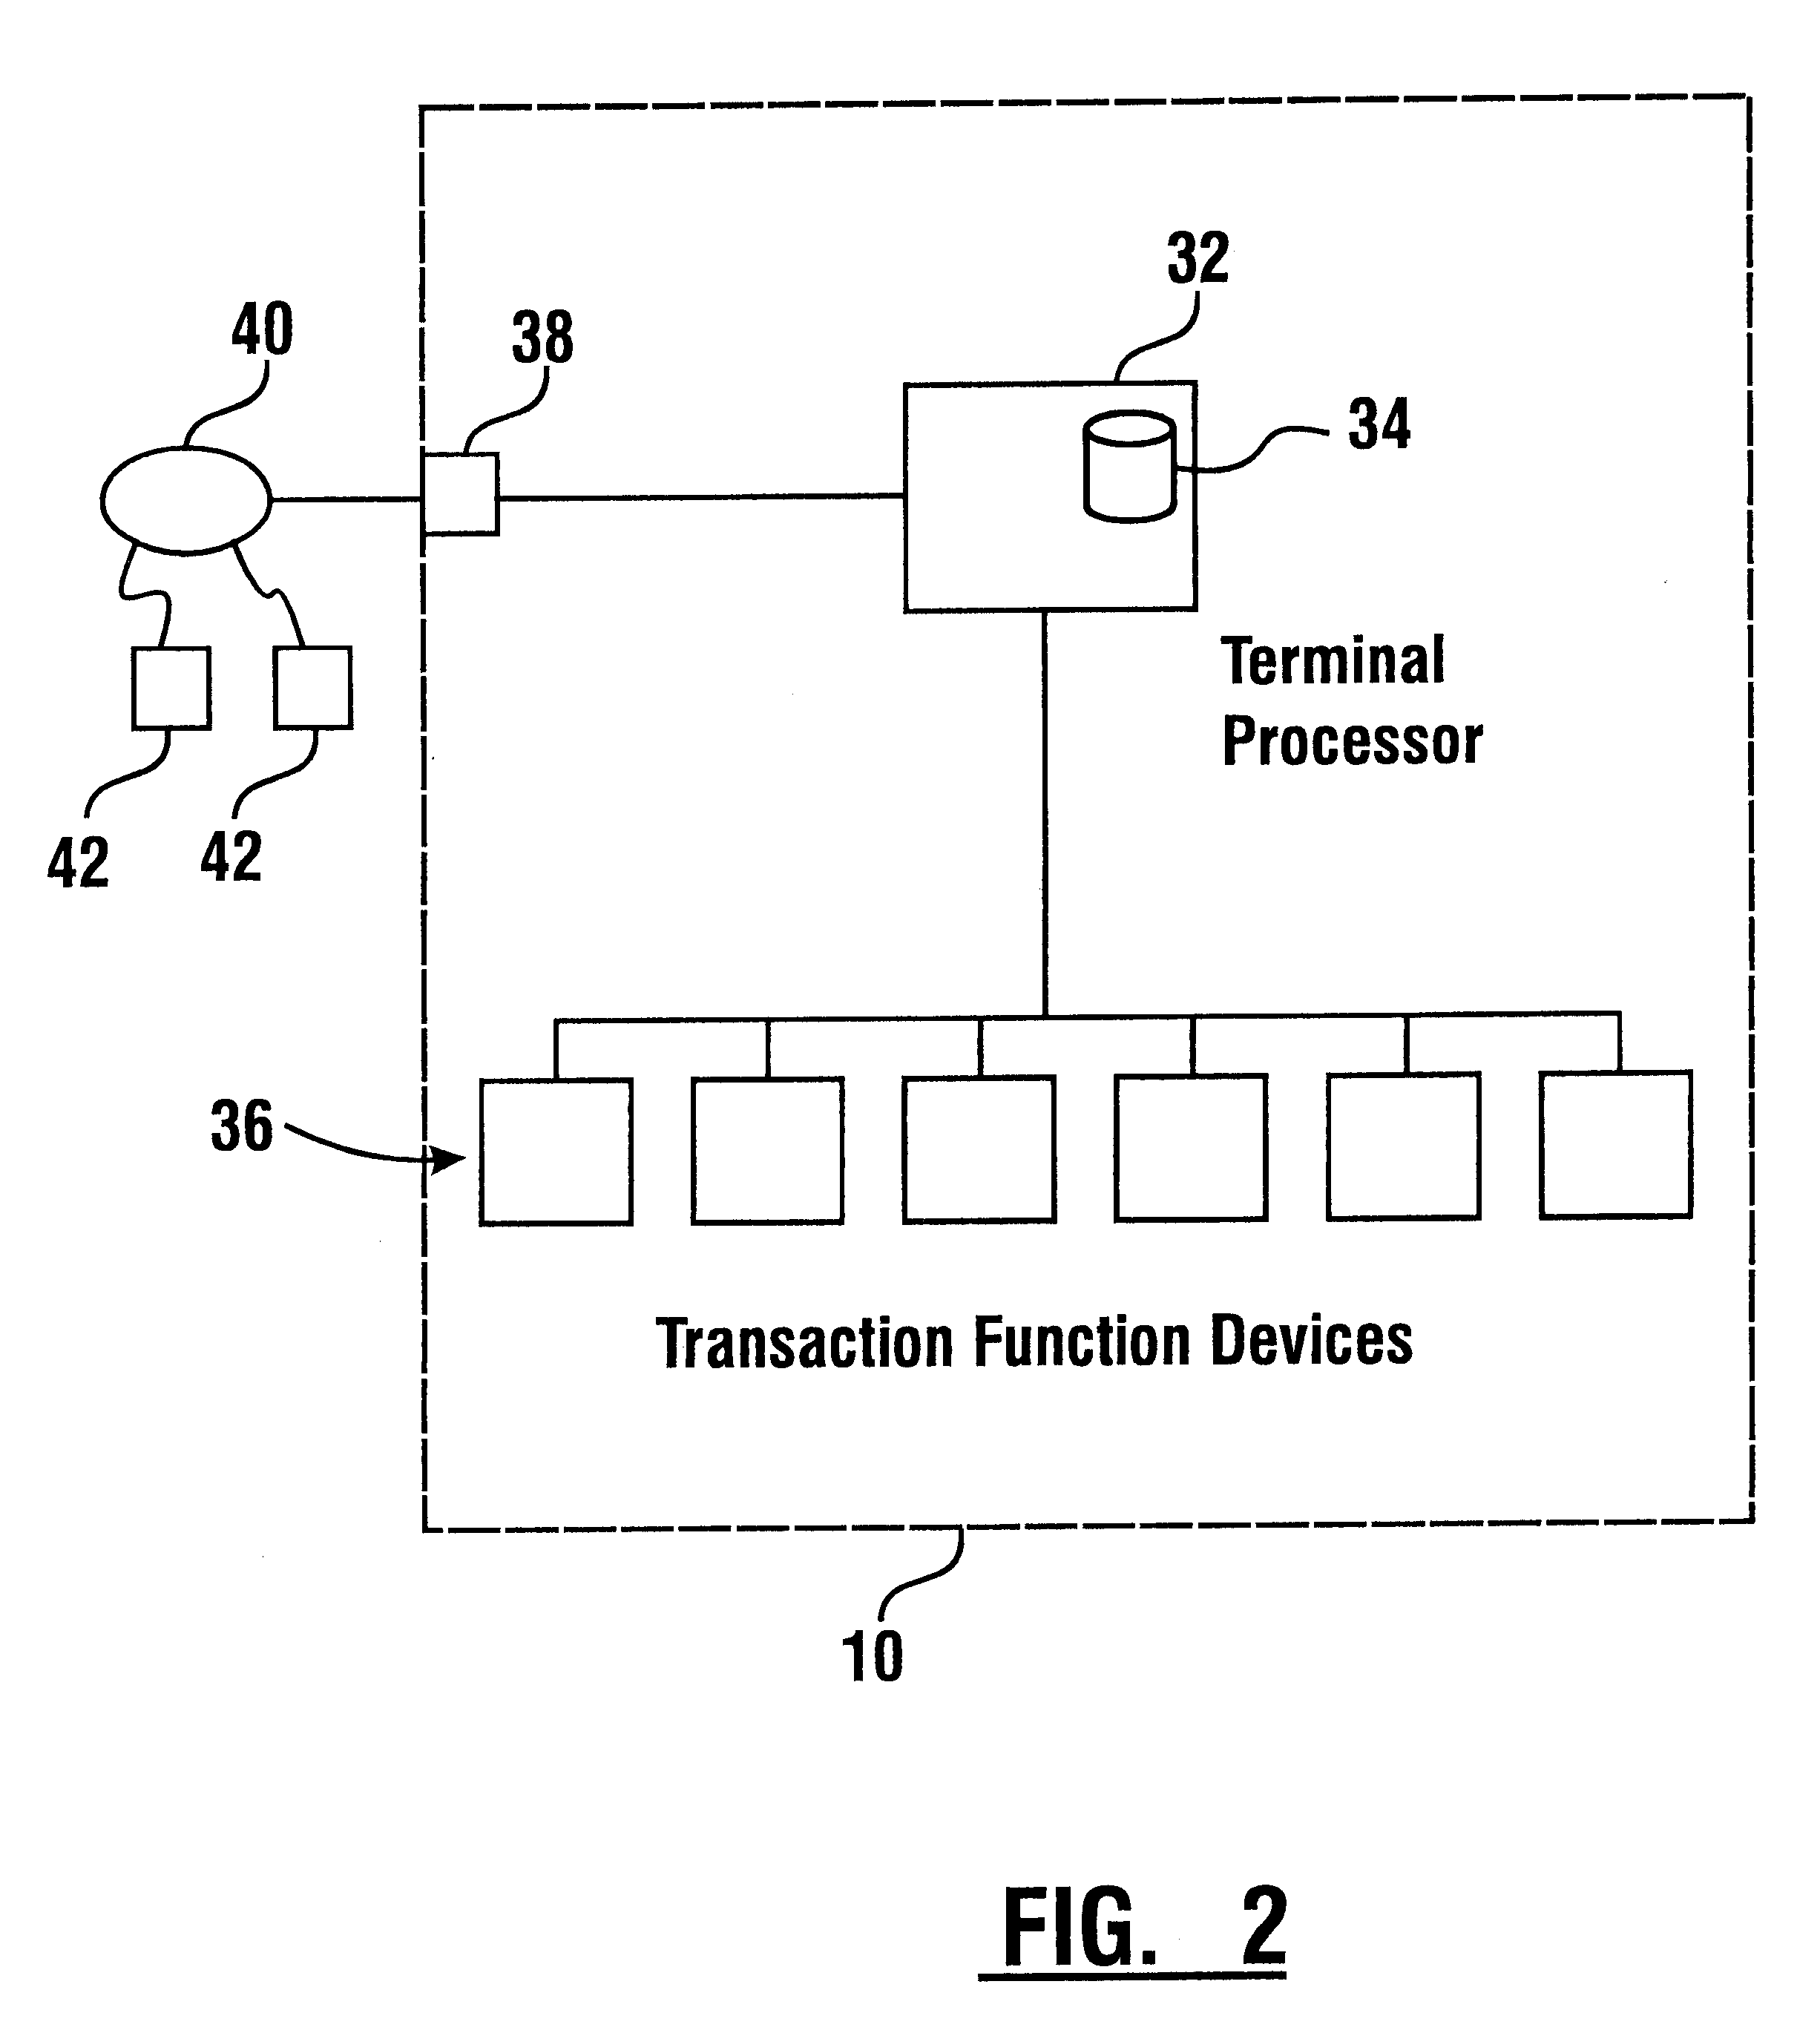 Deposit accepting apparatus and system for automated banking machine